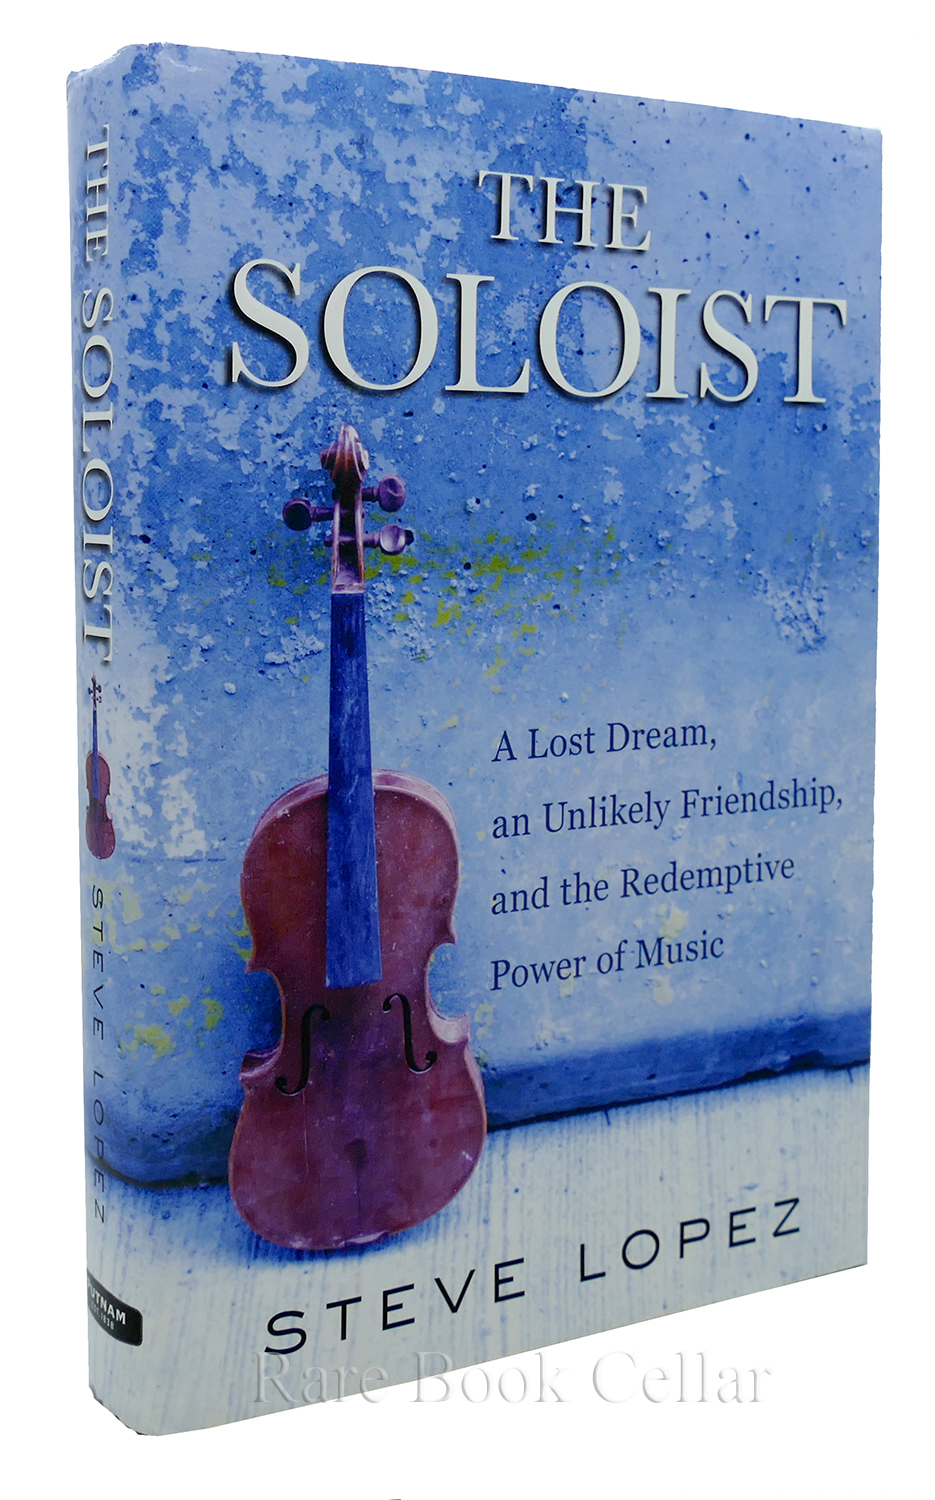 The soloist : : a lost dream, an unlikely friendship, and the